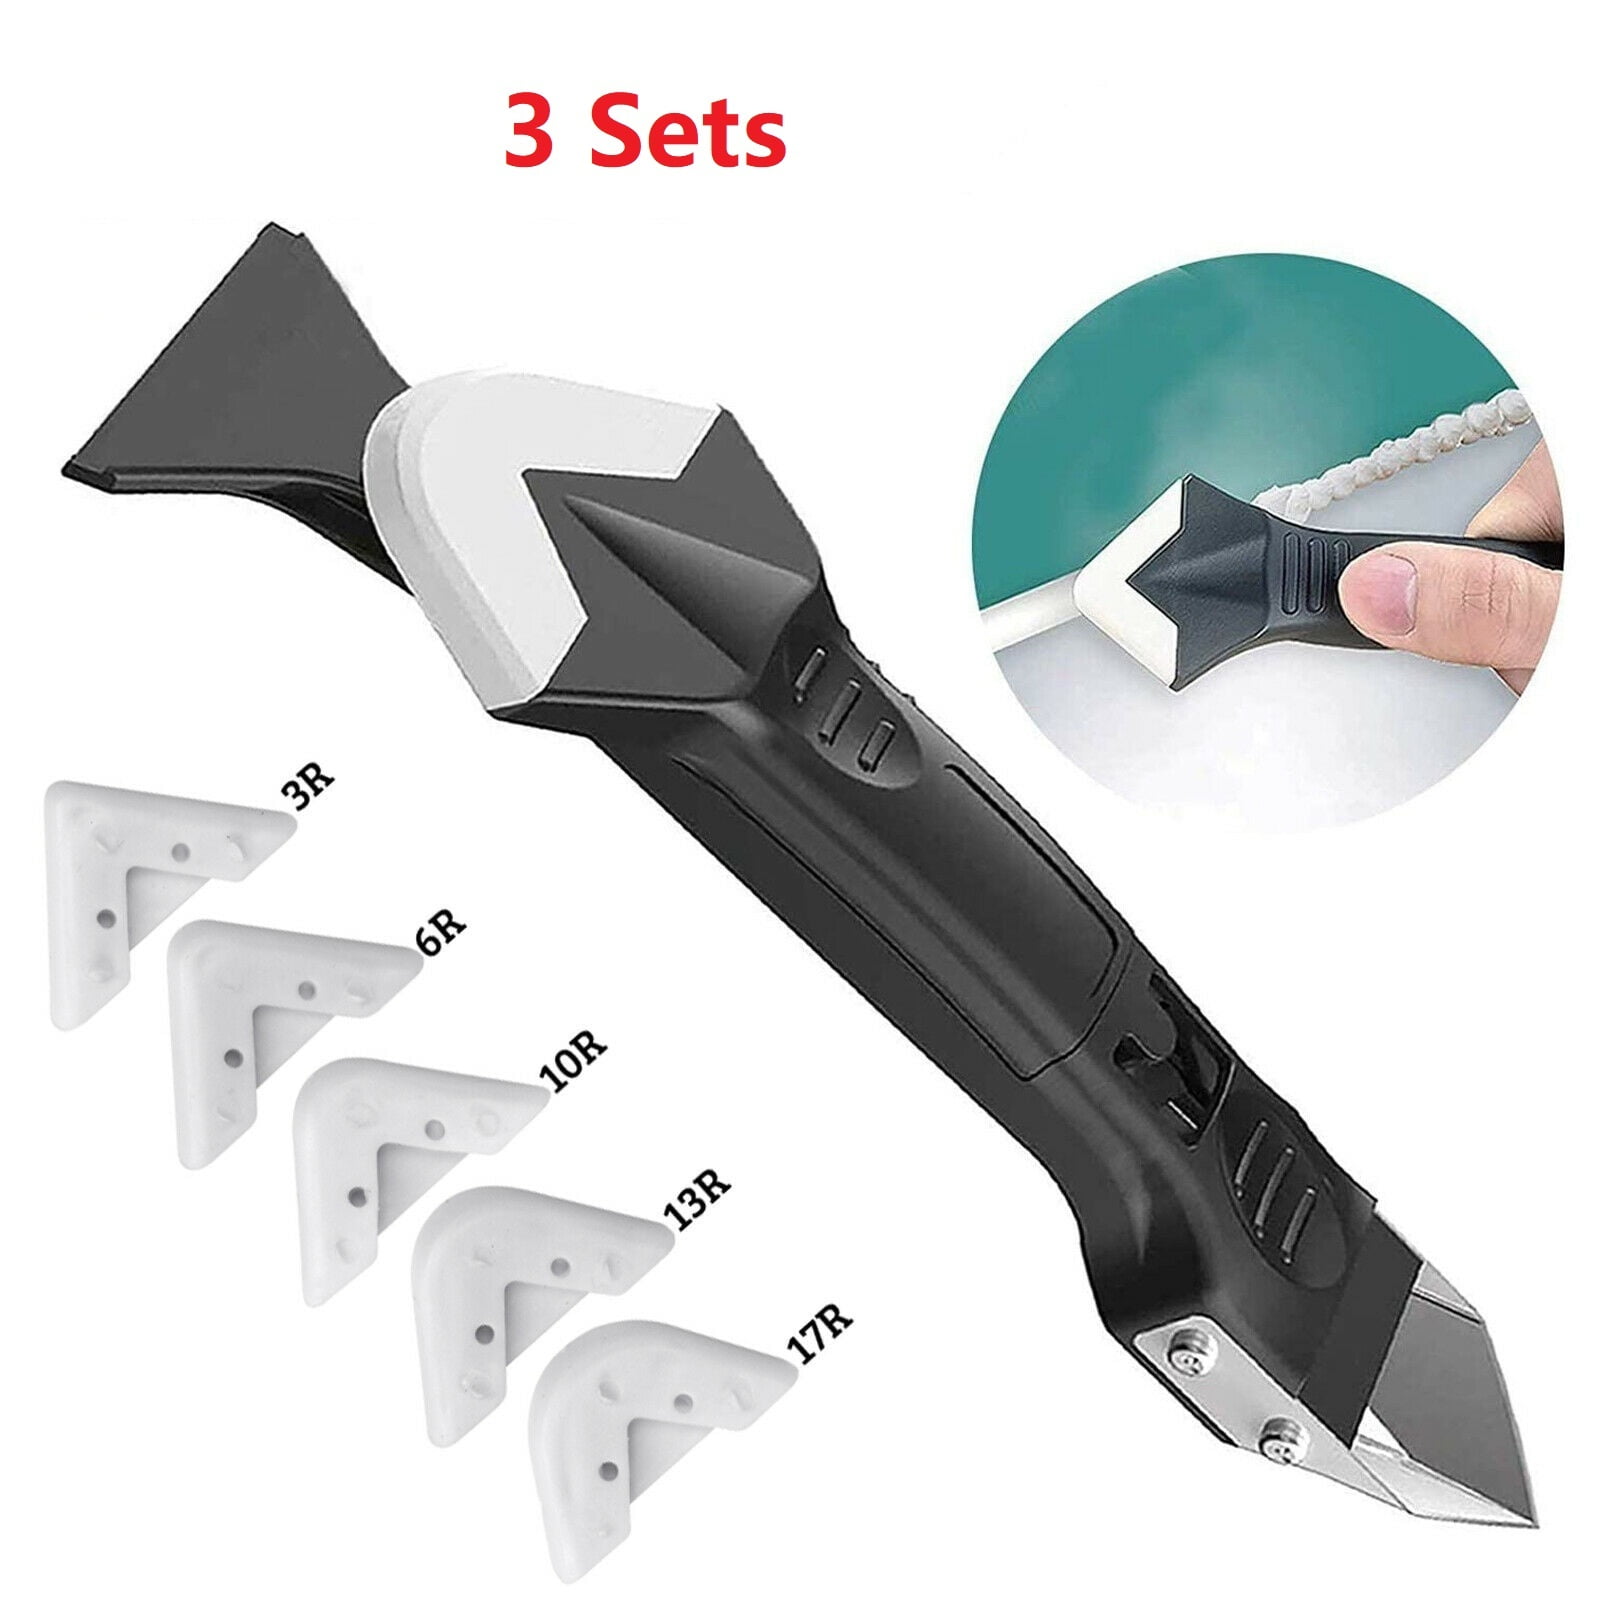 8 In 1 Silicone Remover Caulk Finisher Sealant Smooth Scraper Grout Kit  Tools For Kitchen Bathroom Window, Sink Joint Hand Tools